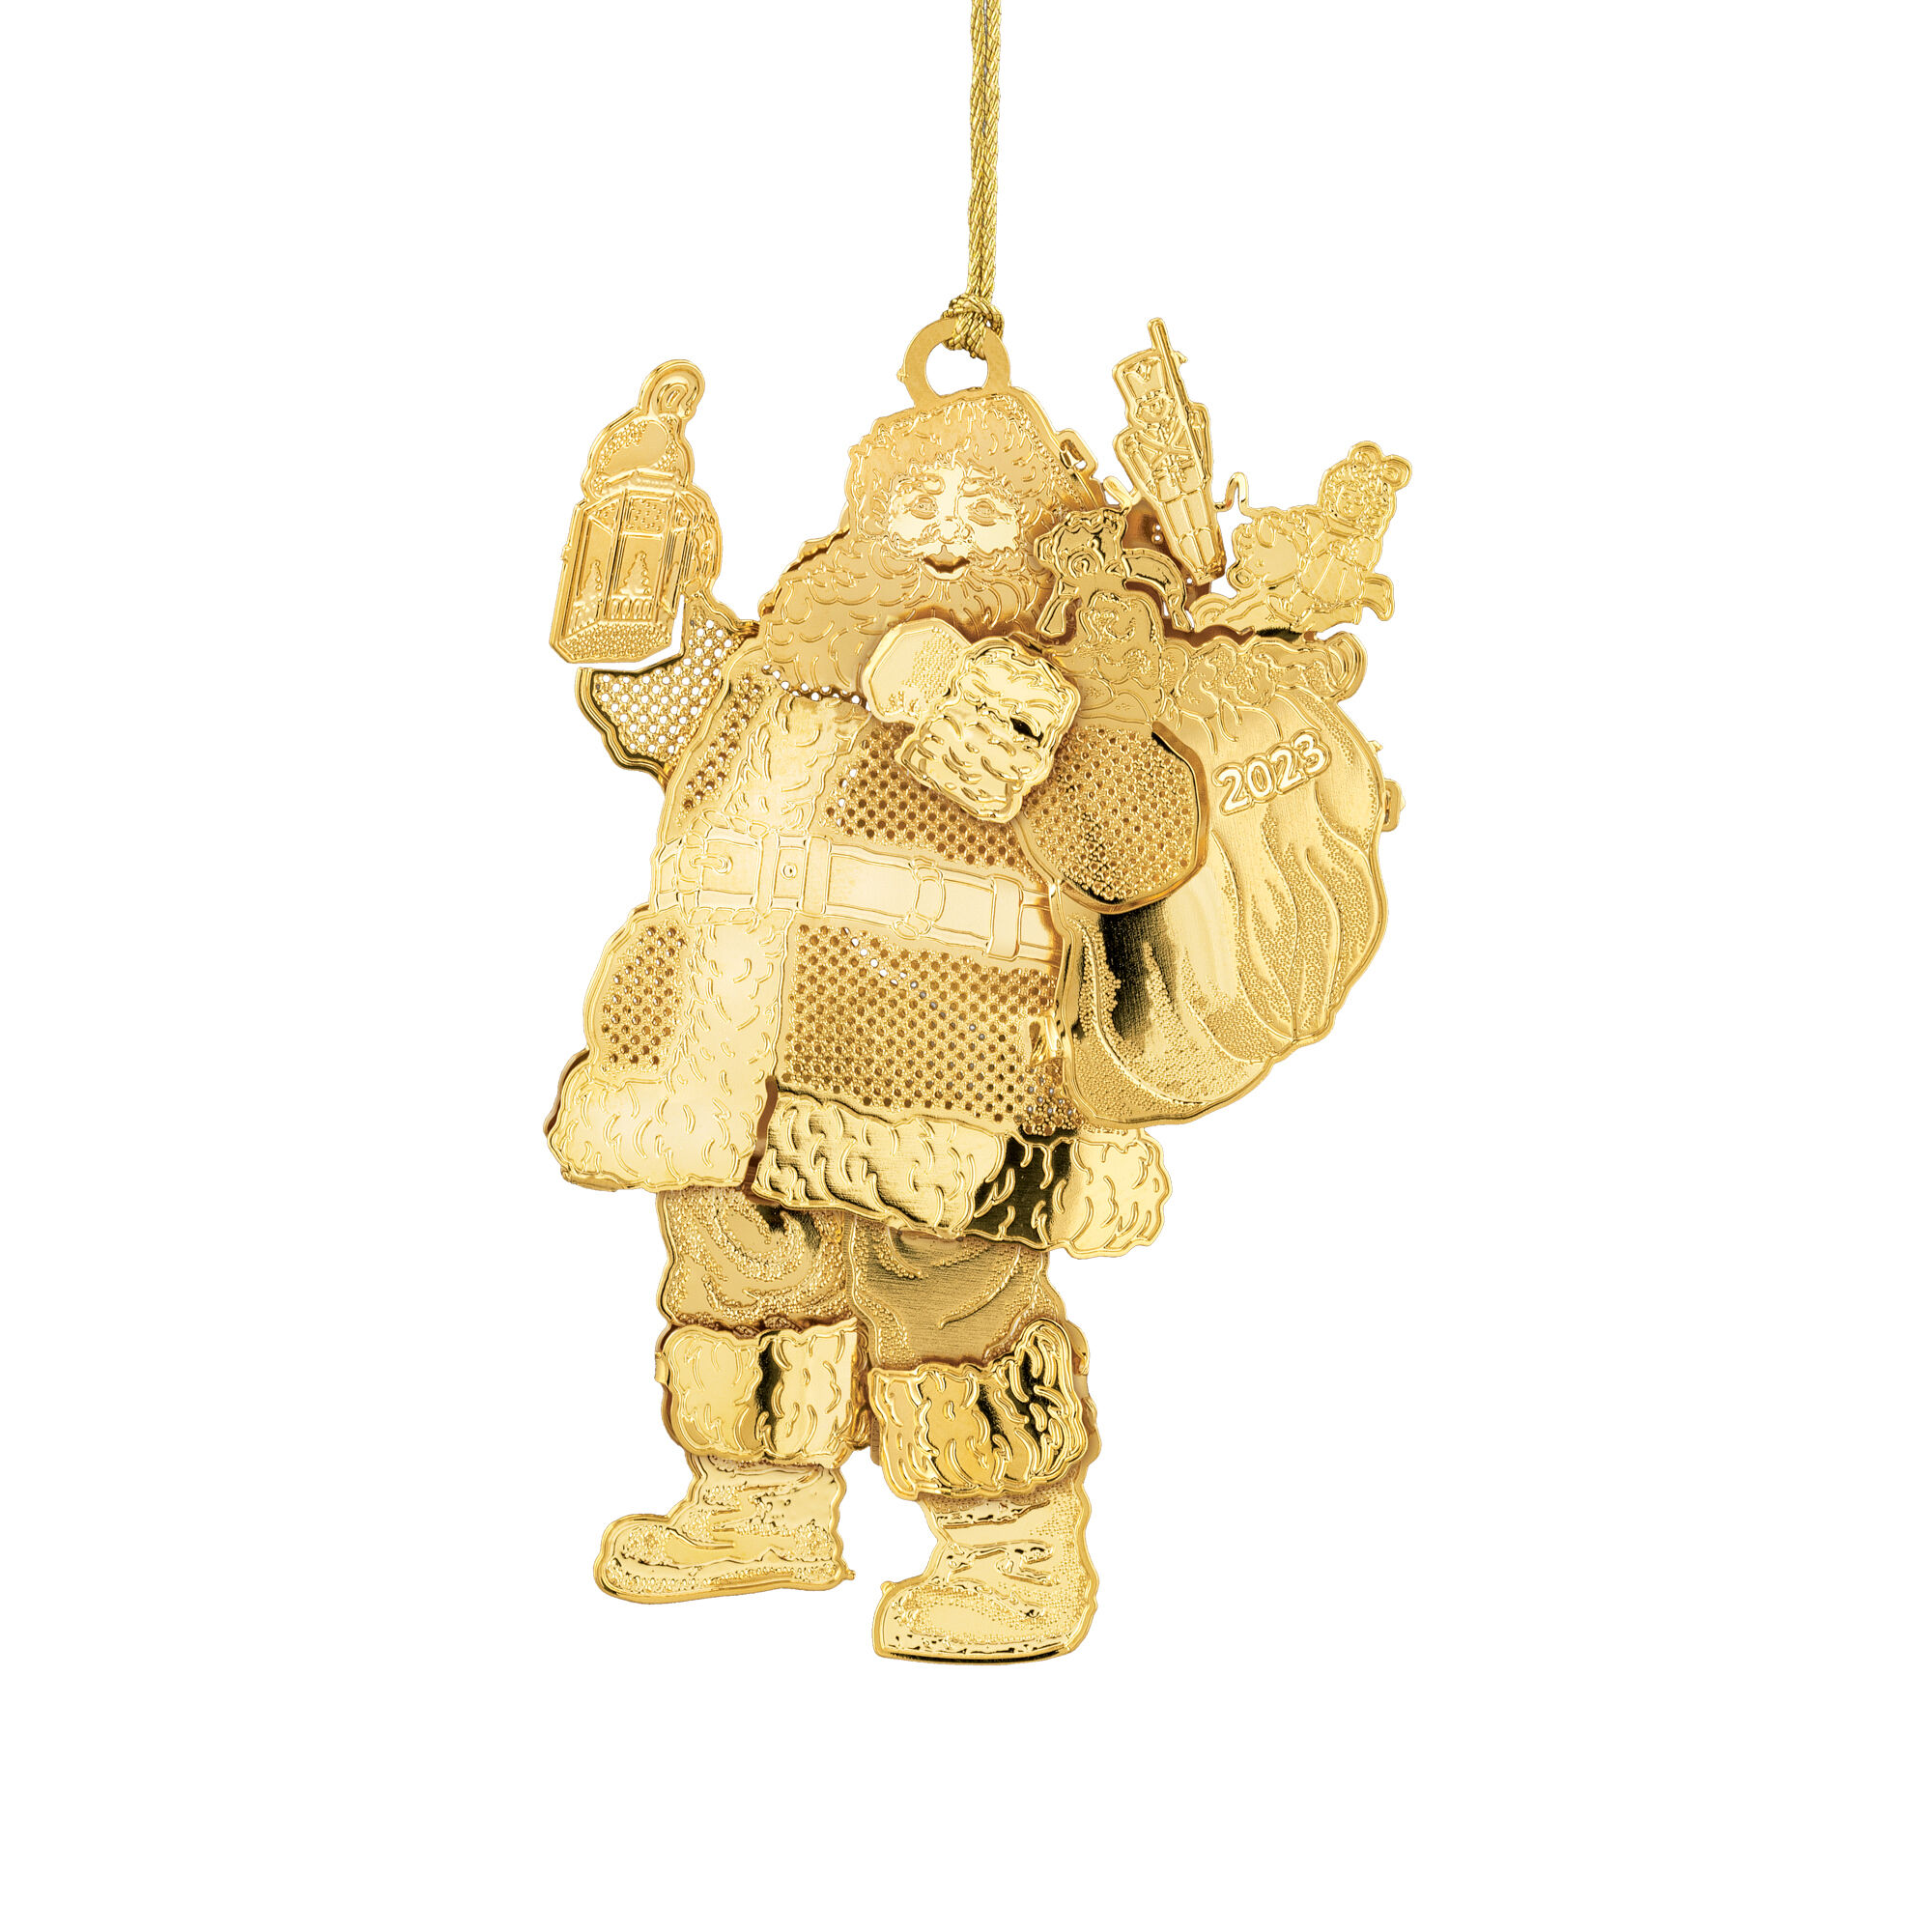 The 2023 Gold Christmas Ornament Collection 10312 0036 j santa